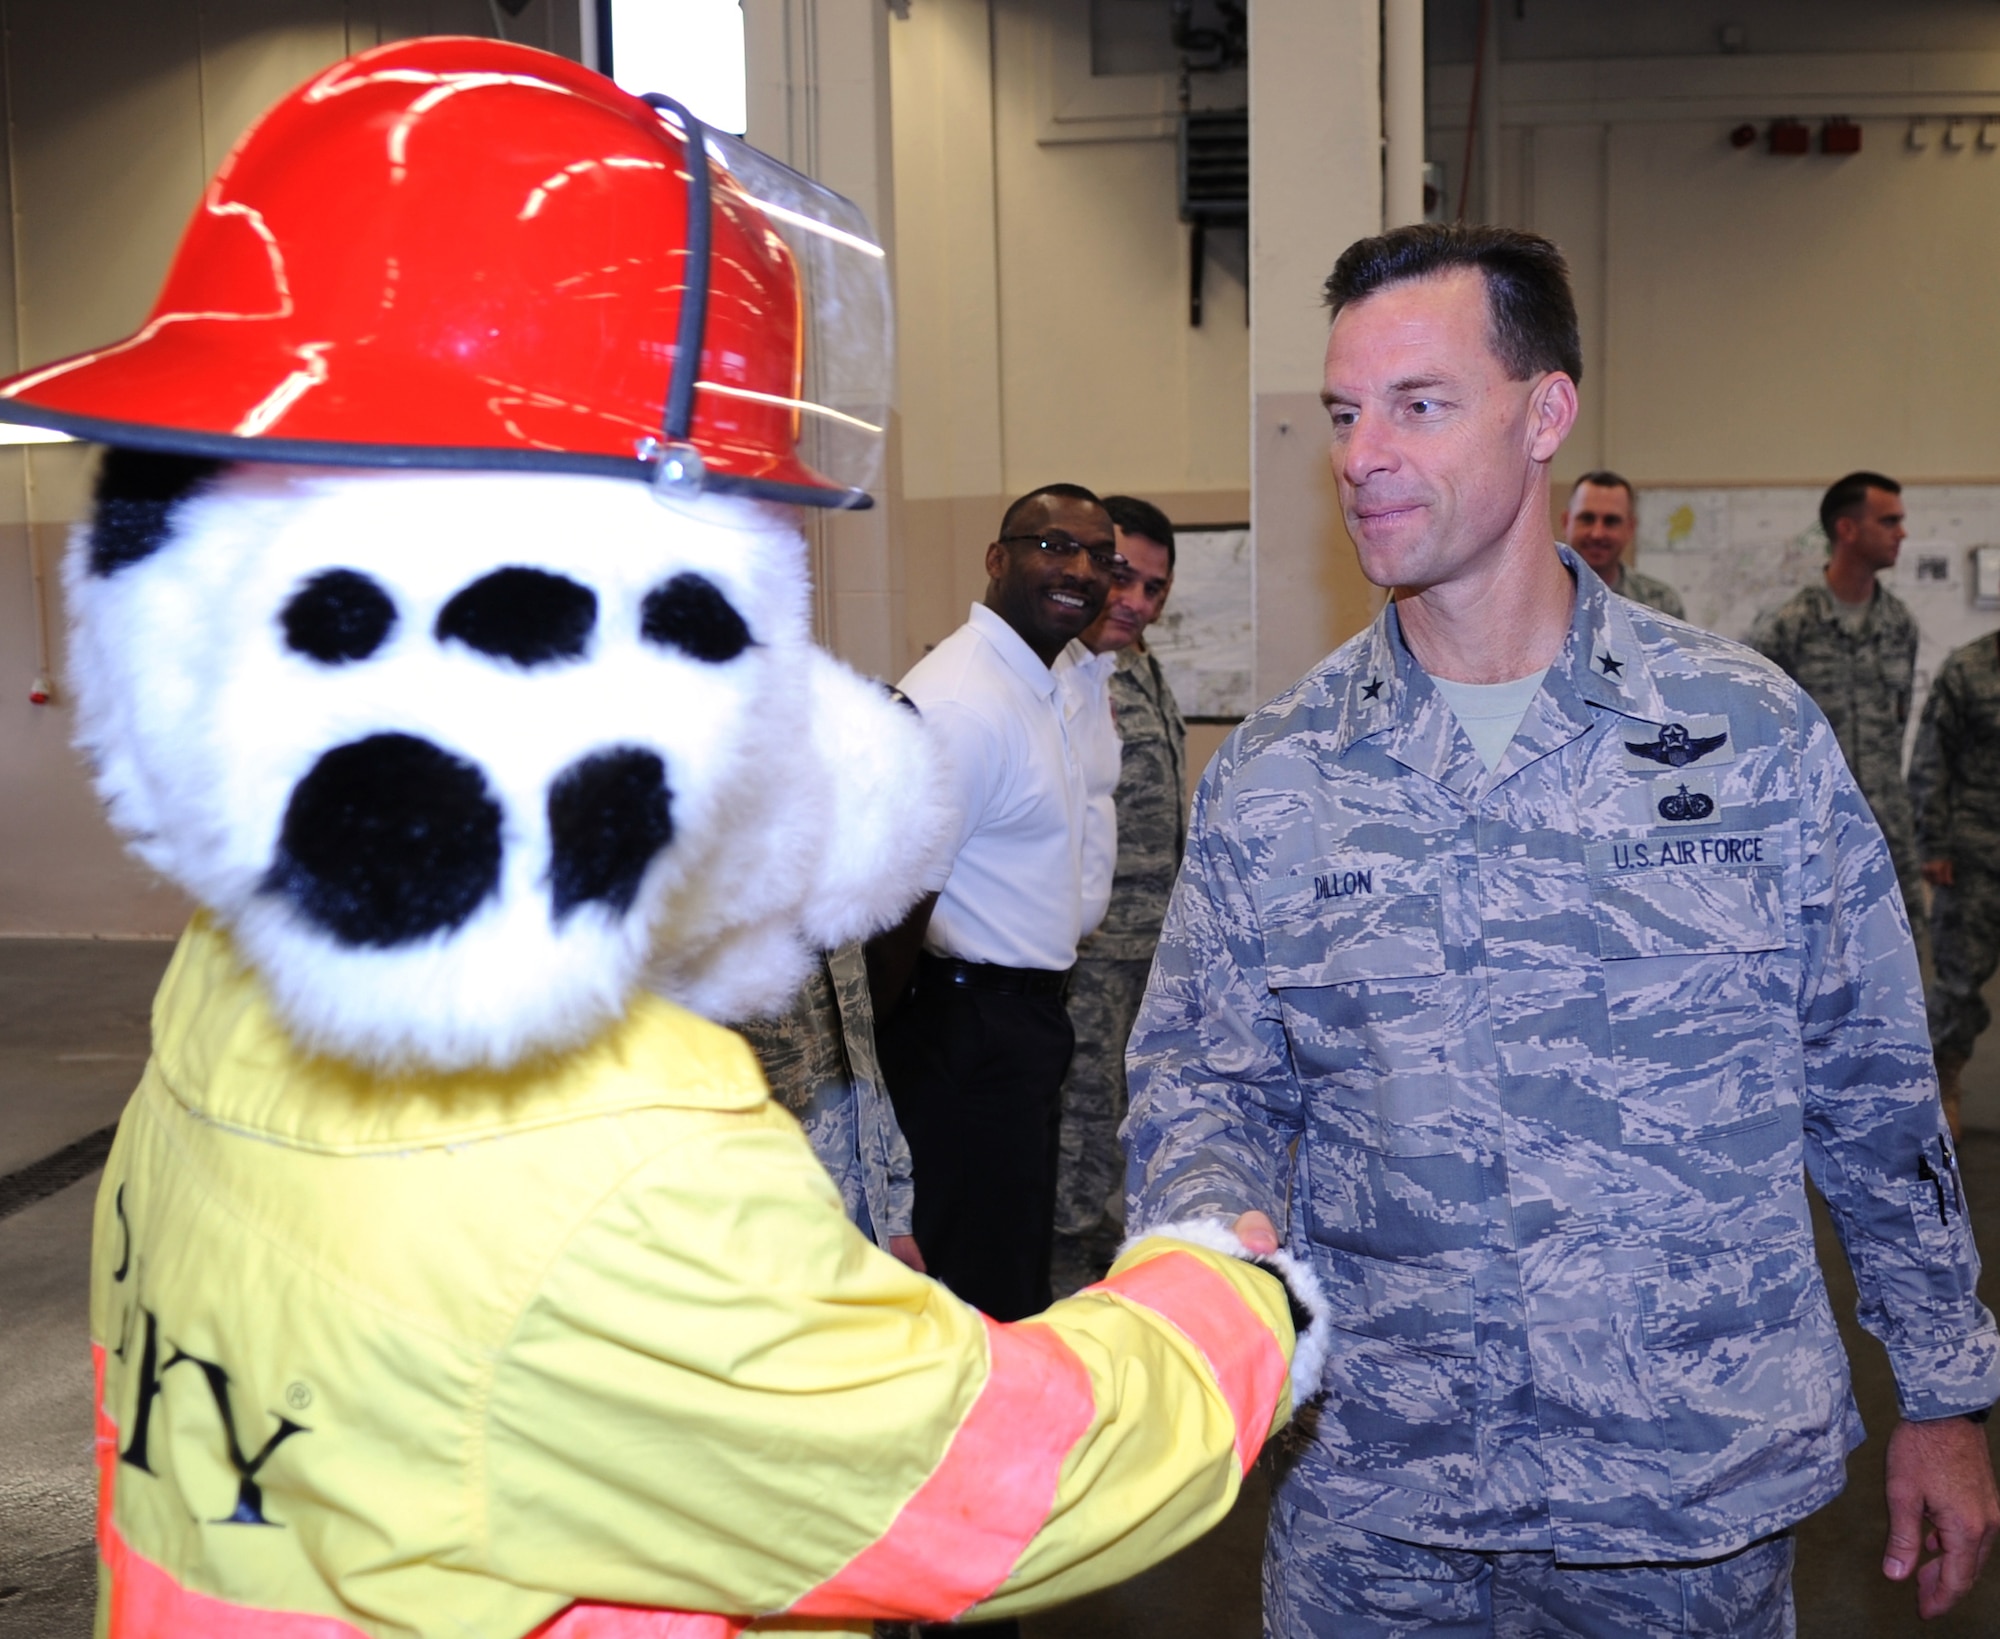 U.S. Air Force Brig. Gen. Mark Dillon, 86th Airlift Wing commander, shakes hand with Sparky the Fire Dog from the 886th Civil Engineer Squadron firefighters after signing the Kaiserslautern Military Community Proclamation, Ramstein Air Base, Germany, Sept. 10, 2010. The signing of the proclamation was to start National Fire Prevention Week, Oct 3-9, with the first week focusing on, "Beep! Beep! Beep! Smoke Alarm; a sound you can live with". (U.S. Air Force photo by Senior Airman Caleb Pierce)